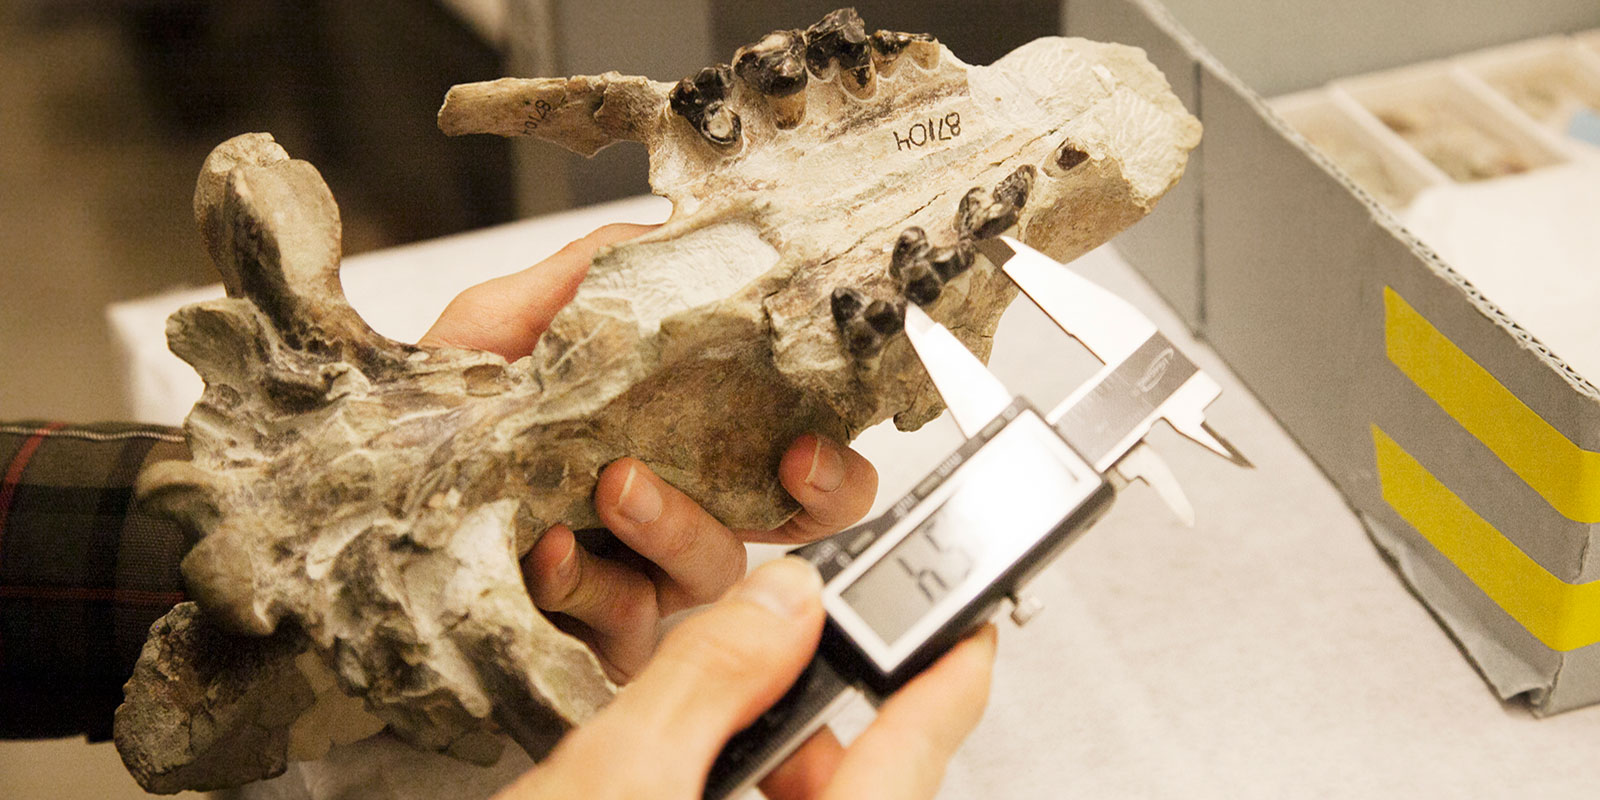 A researcher holds a large bone from a wolf-like carnivore while using a metal hand tool to measure its length